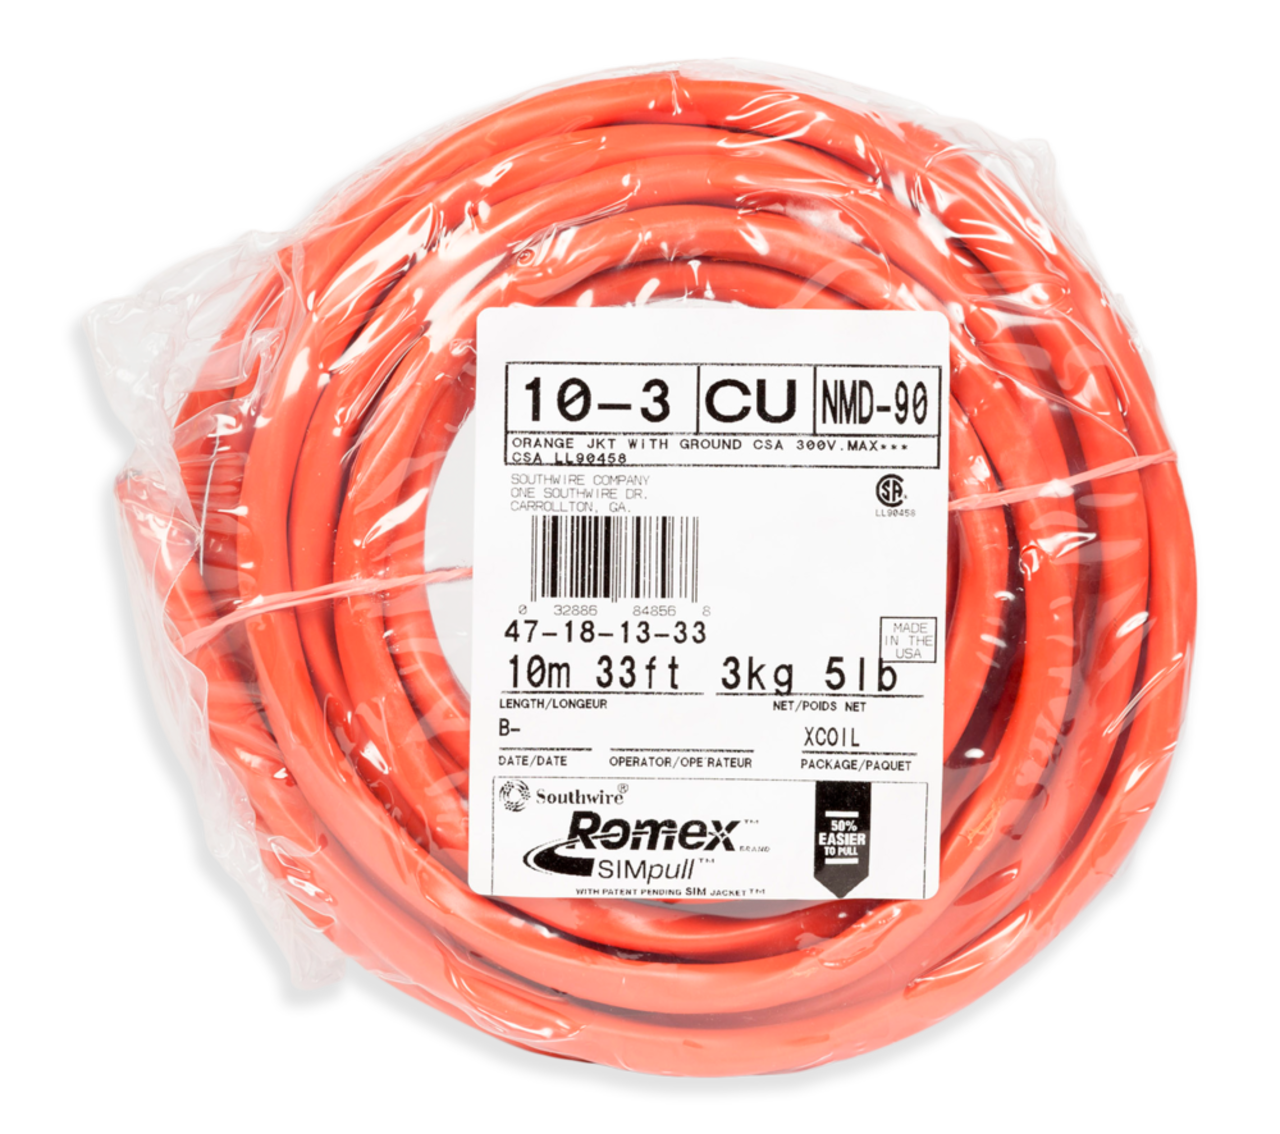 https://media-www.canadiantire.ca/product/fixing/electrical/rough-electrical/0529820/10-metre-10-3-nmd90-wire-62b48c8b-5939-4d6e-ba03-6c337ef28f75.png?imdensity=1&imwidth=640&impolicy=mZoom